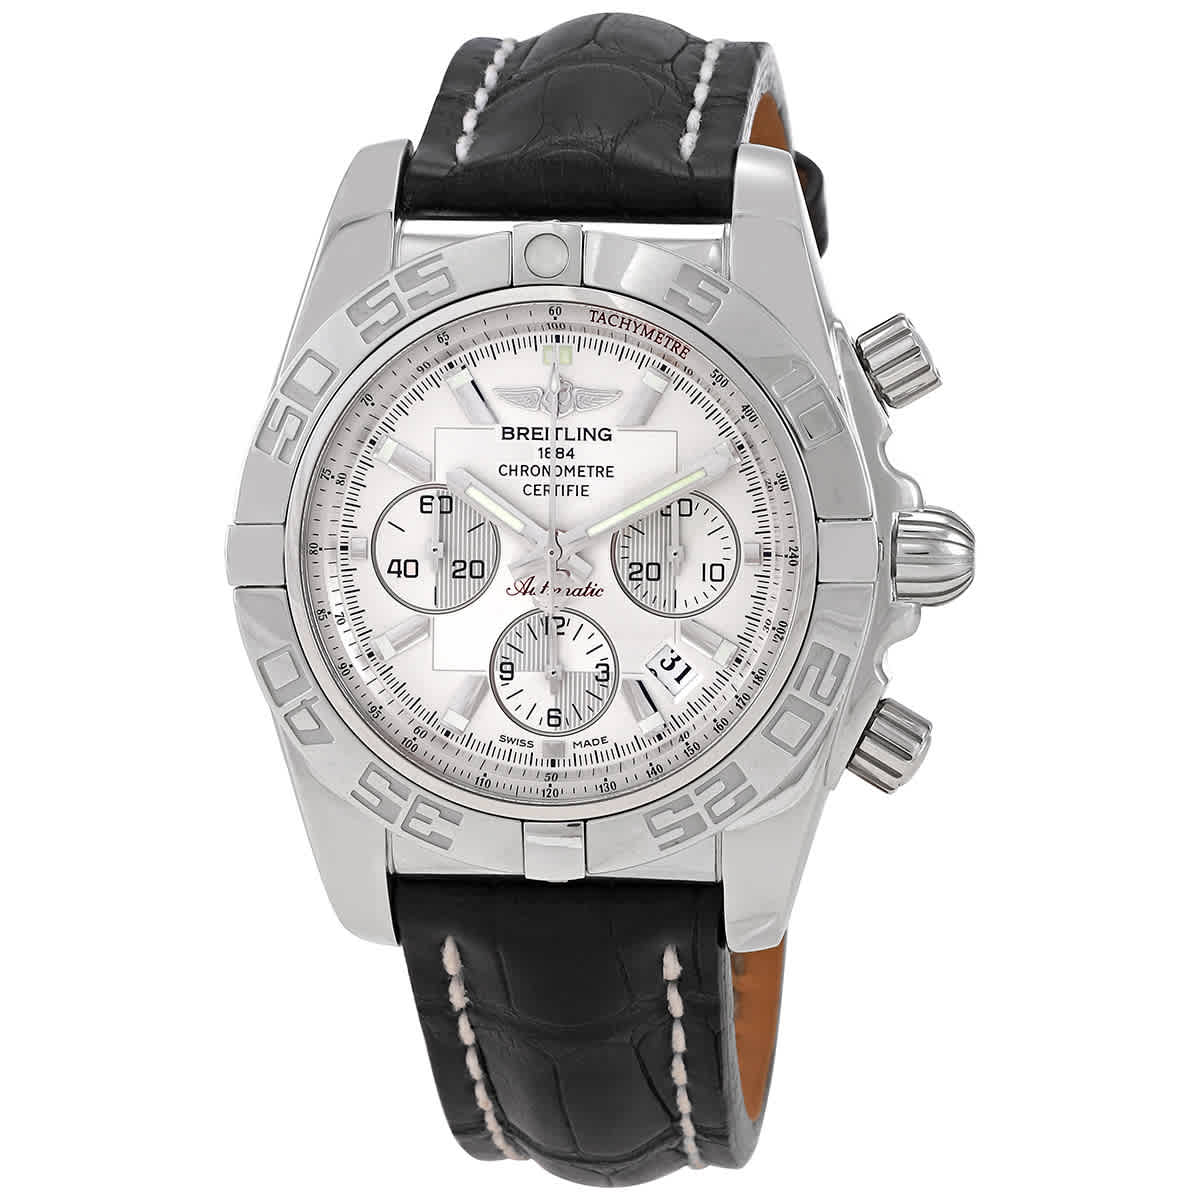 Breitling Chronograph Automatic Watch Ab011012/g684bkcd In Black / Silver